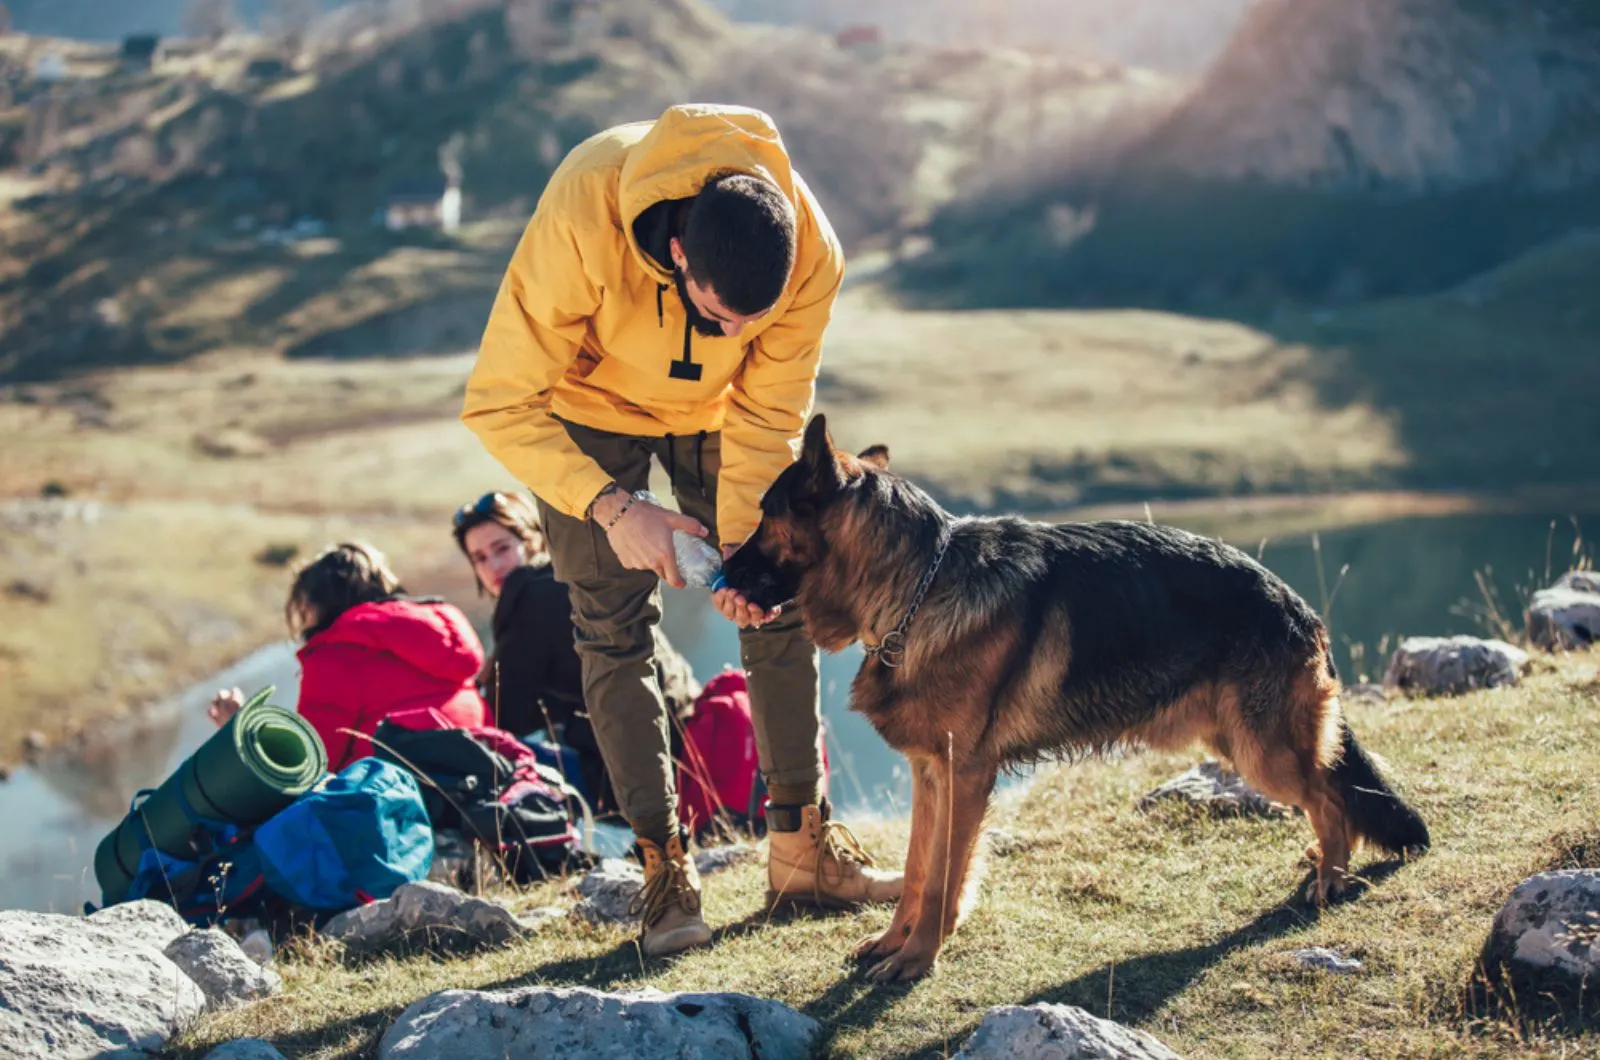 man gives water to the dog while resting from hiking